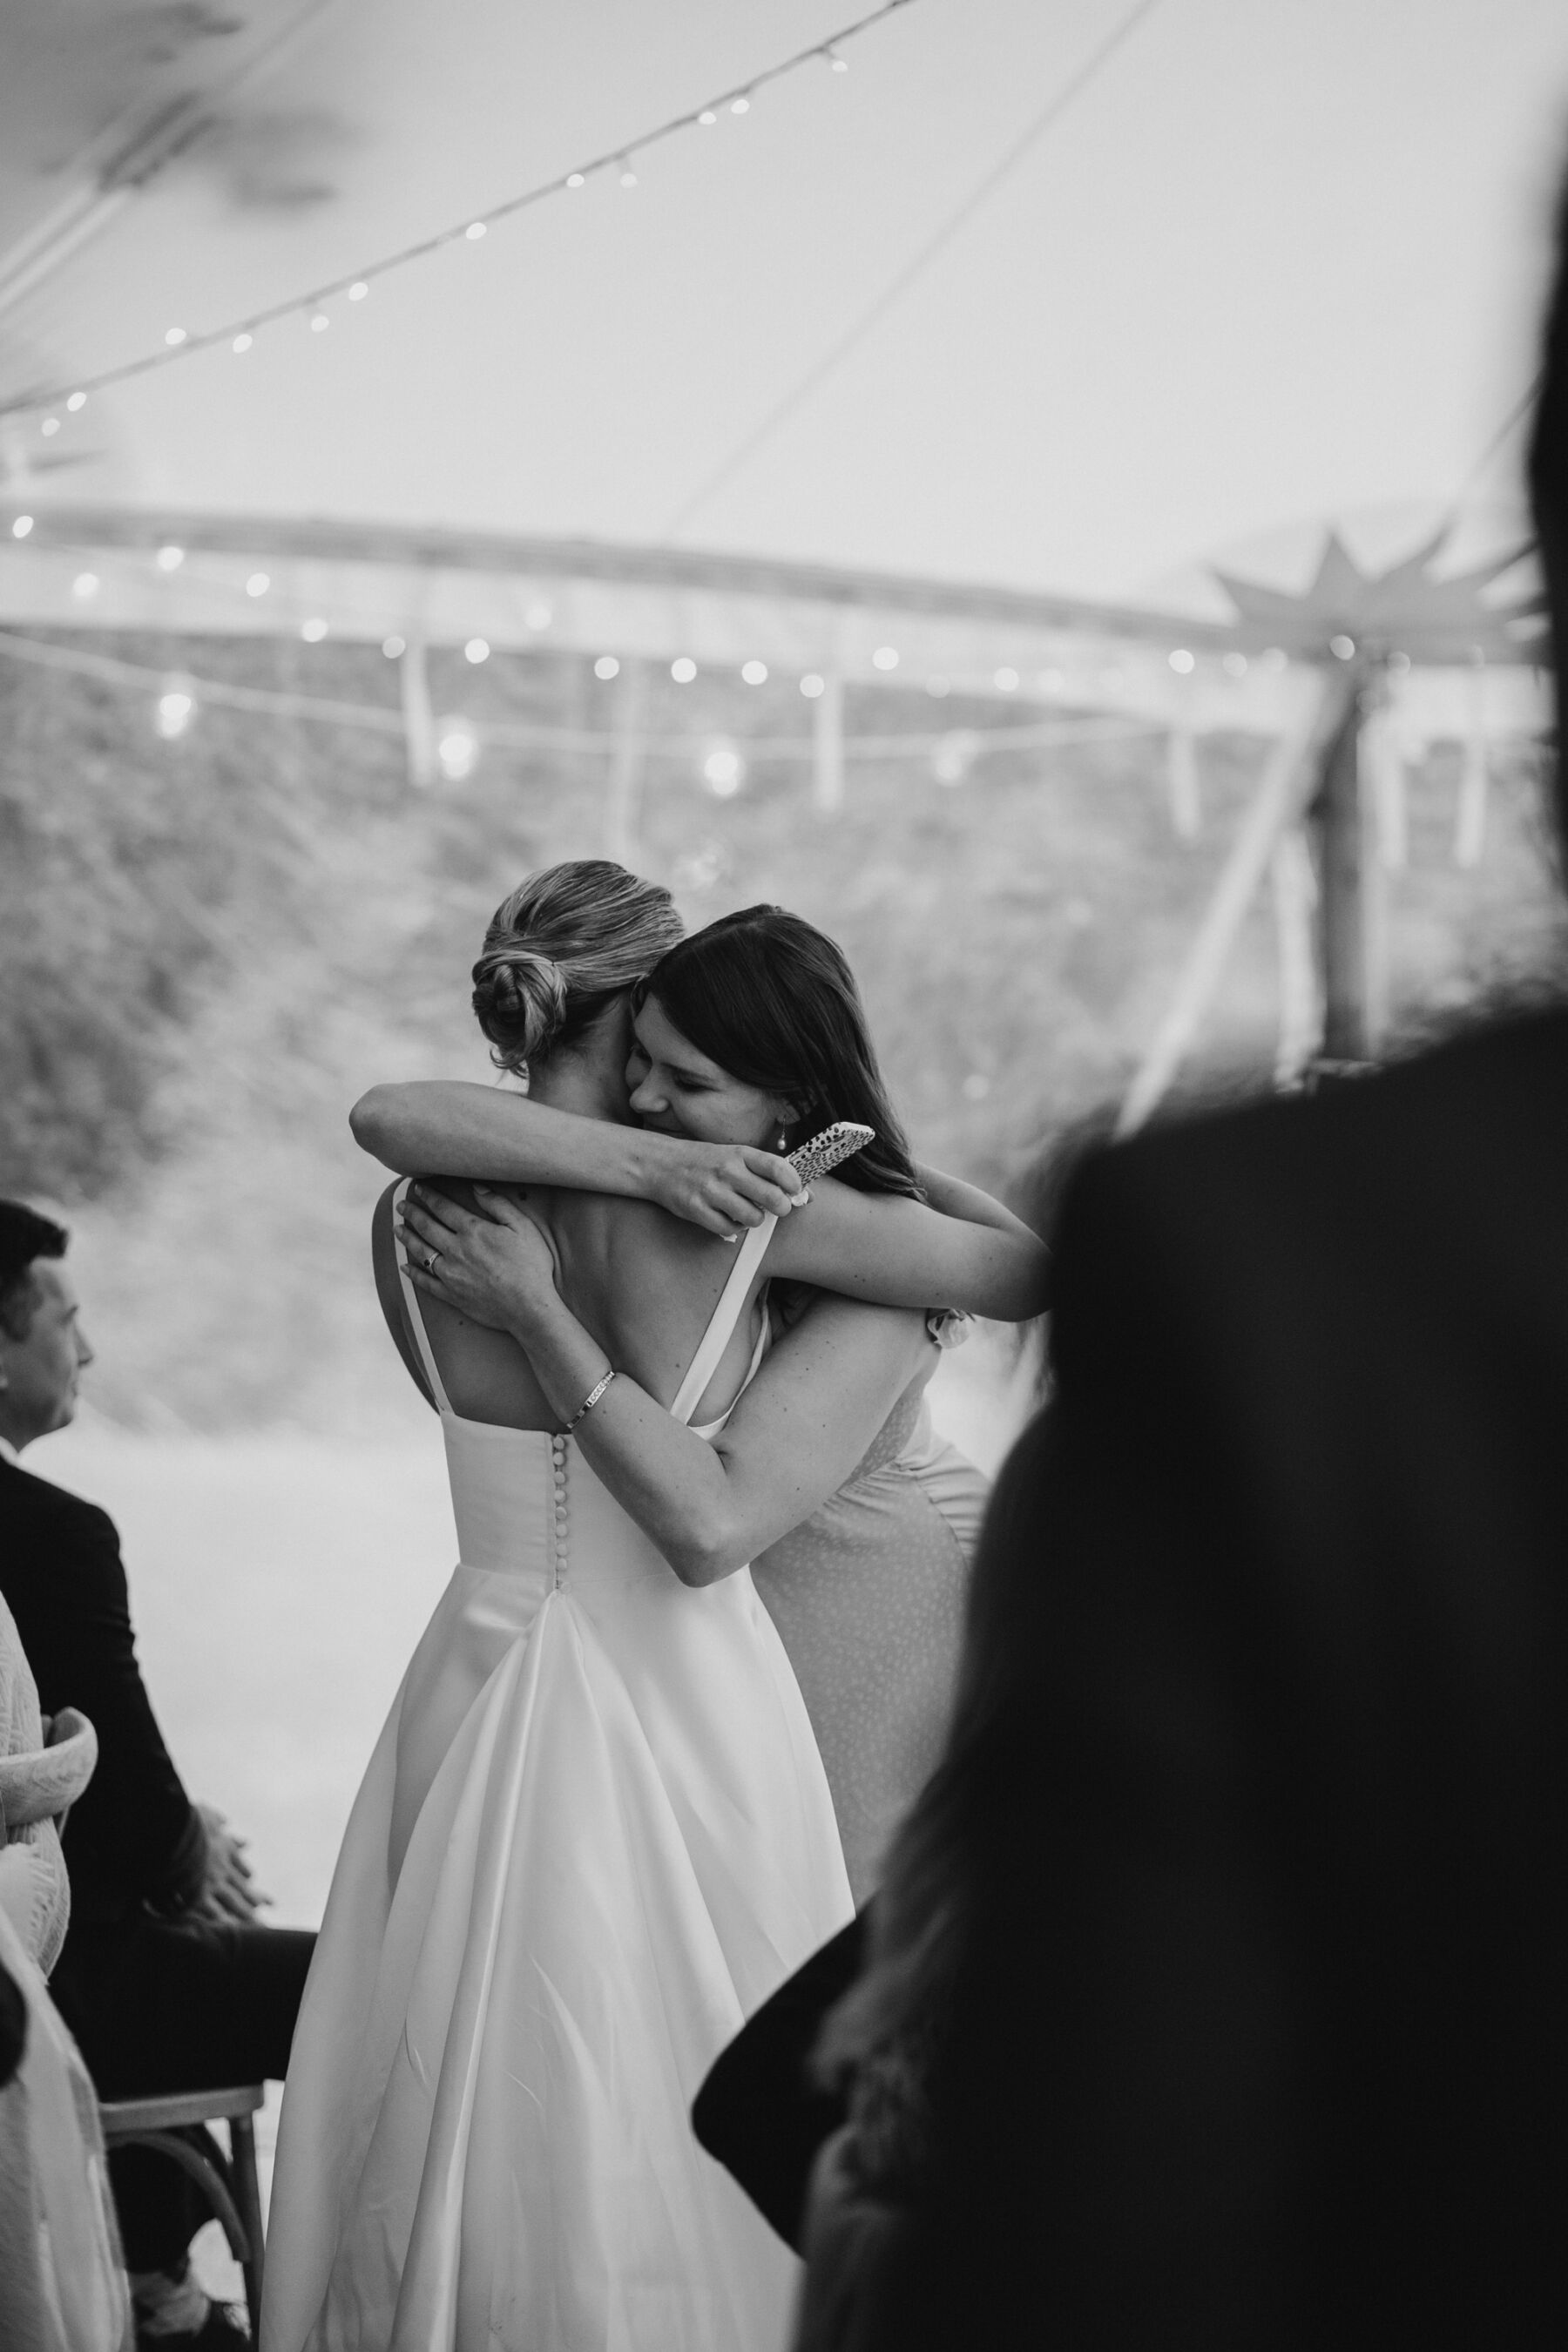 Bride hugging a guest inside a marquee at a wedding.